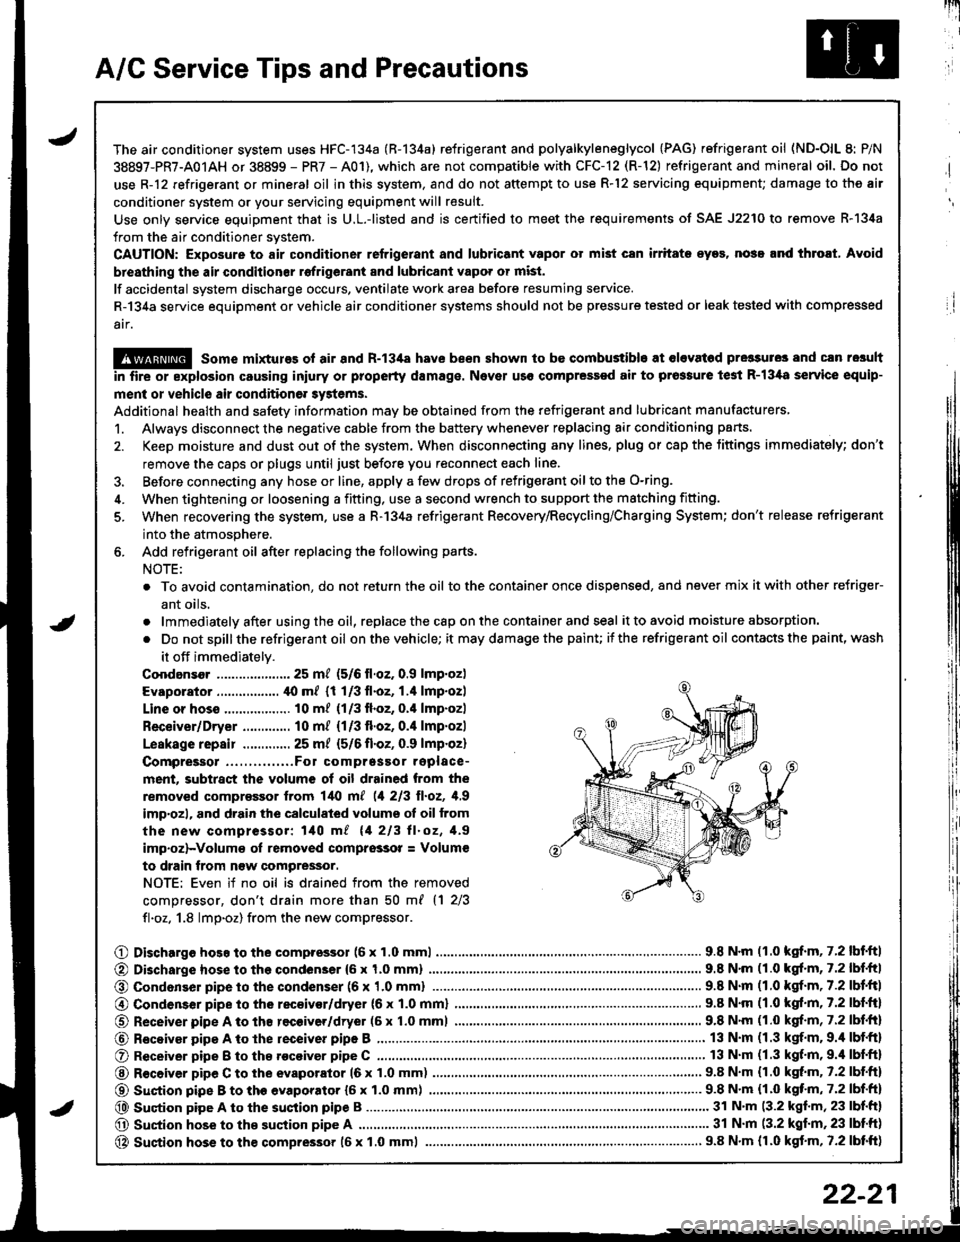 HONDA INTEGRA 1998 4.G Repair Manual A/C Service Tips and Precautions
The air conditioner system uses HFC-134a (R-134a) refrigerant and polyalkyleneglycol {PAG) refrigerant oil (ND-OlL 8: P/N
38897-PR7-A01AH or 38899 - PR7 - A01), which 